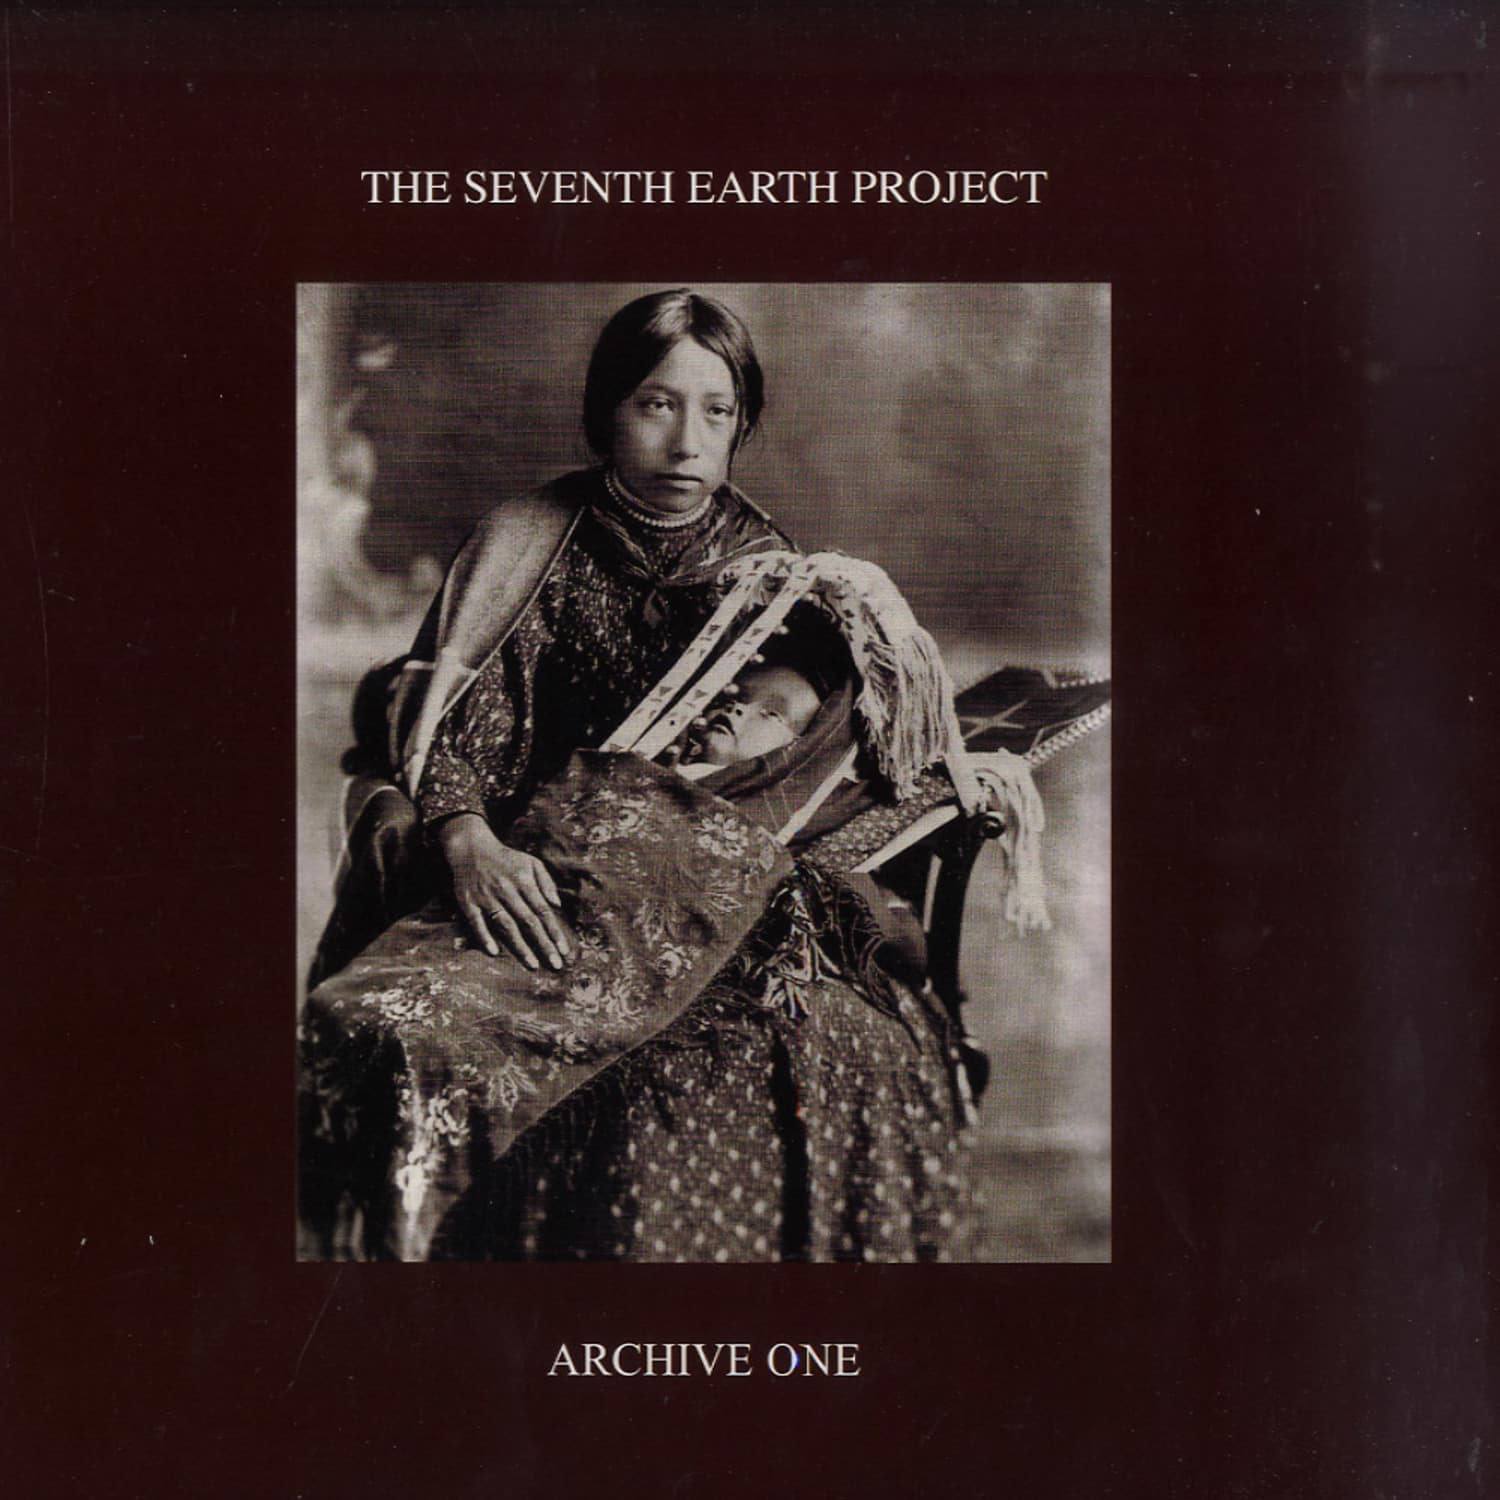 The Seventh Earth Project - ARCHIVE ONE